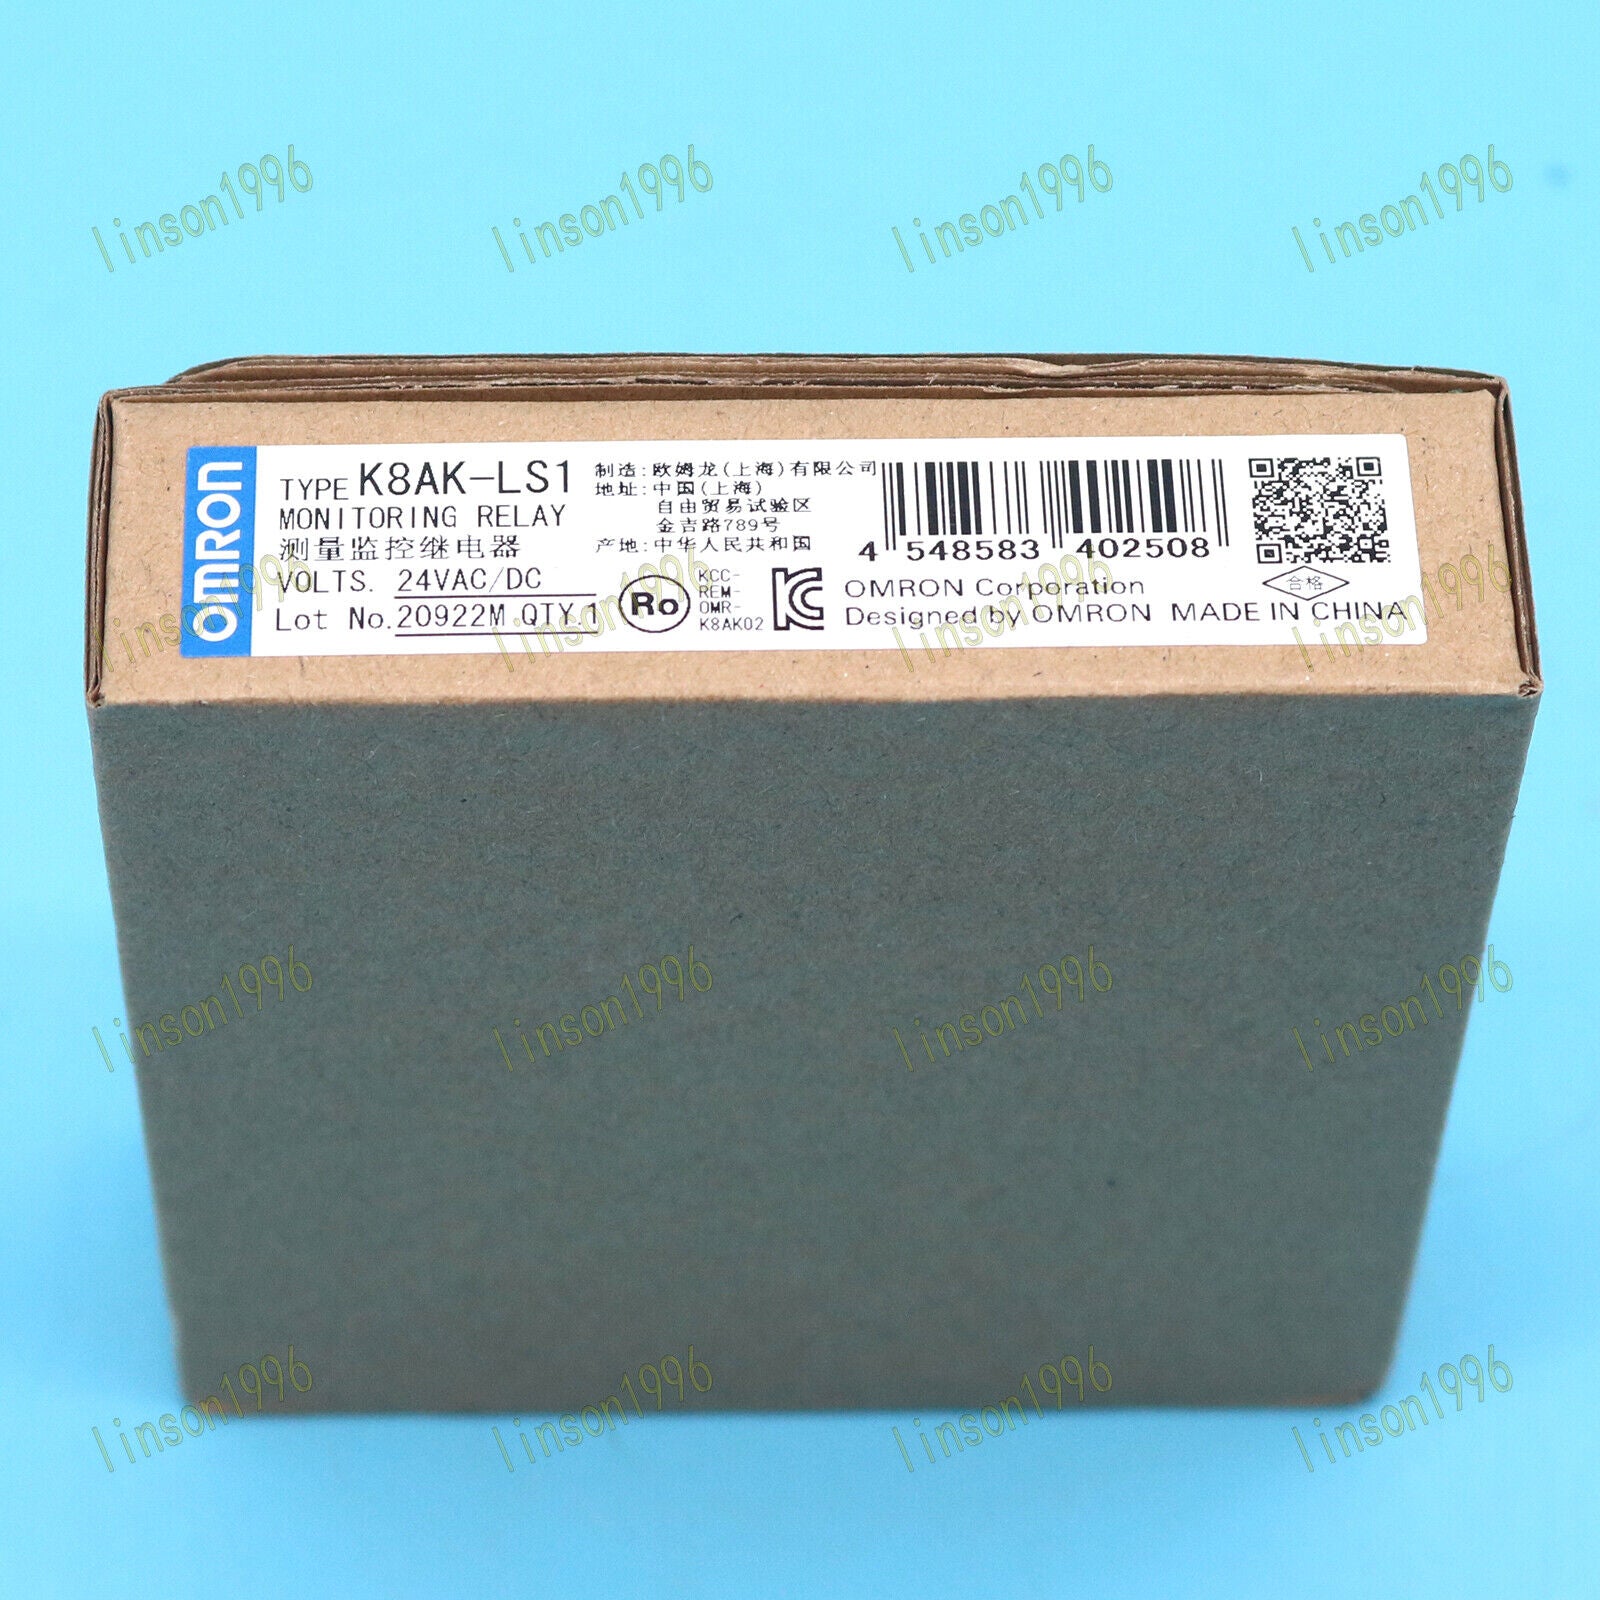 new 1PC  OMRON K8AK-LS1 24VAC/DC Monitoring Relay Fast Delivery